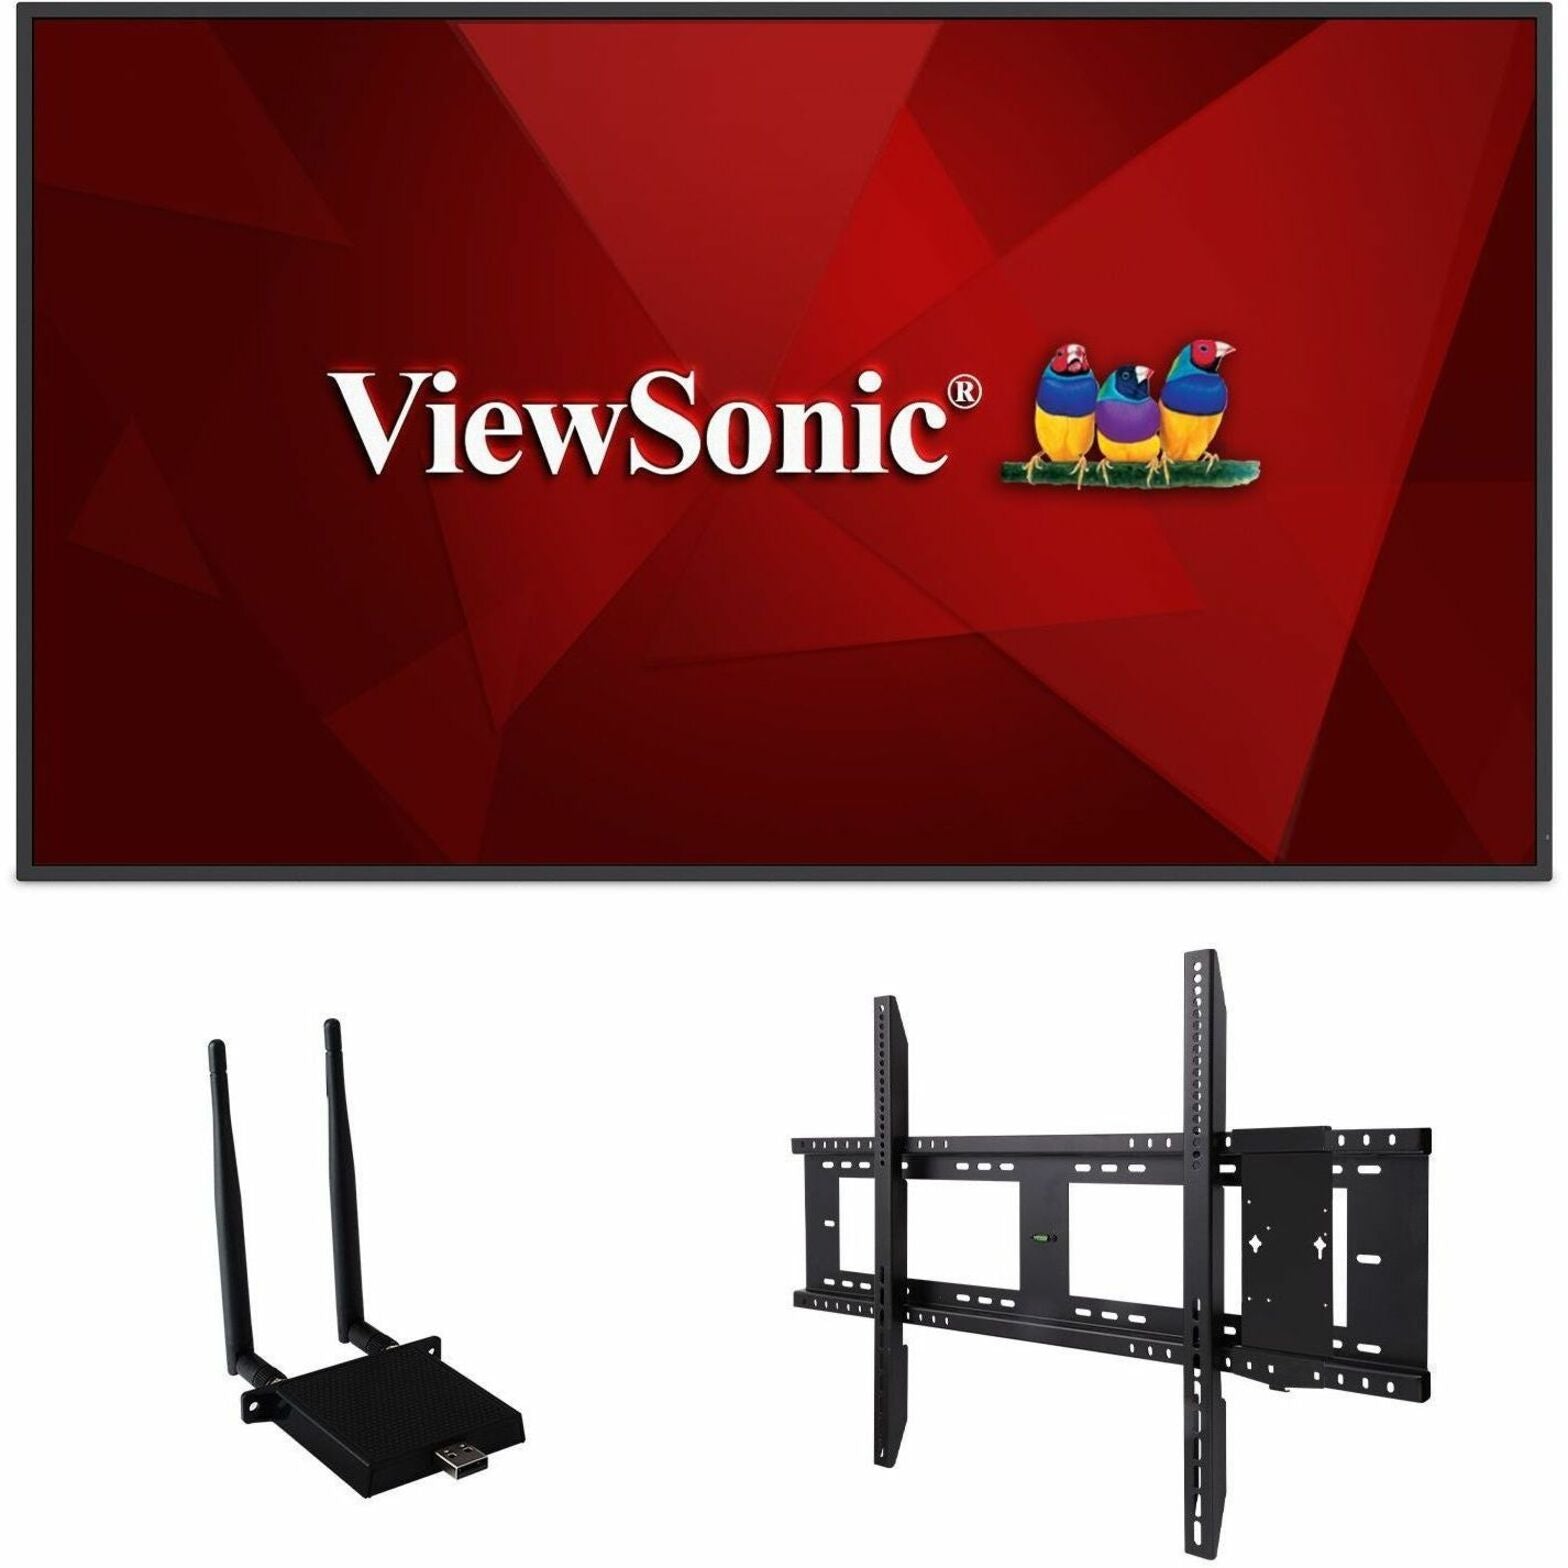 ViewSonic CDE9830-E1 Digital Signage Display - 4K, Integrated Software, WiFi Adapter, Fixed Wall Mount